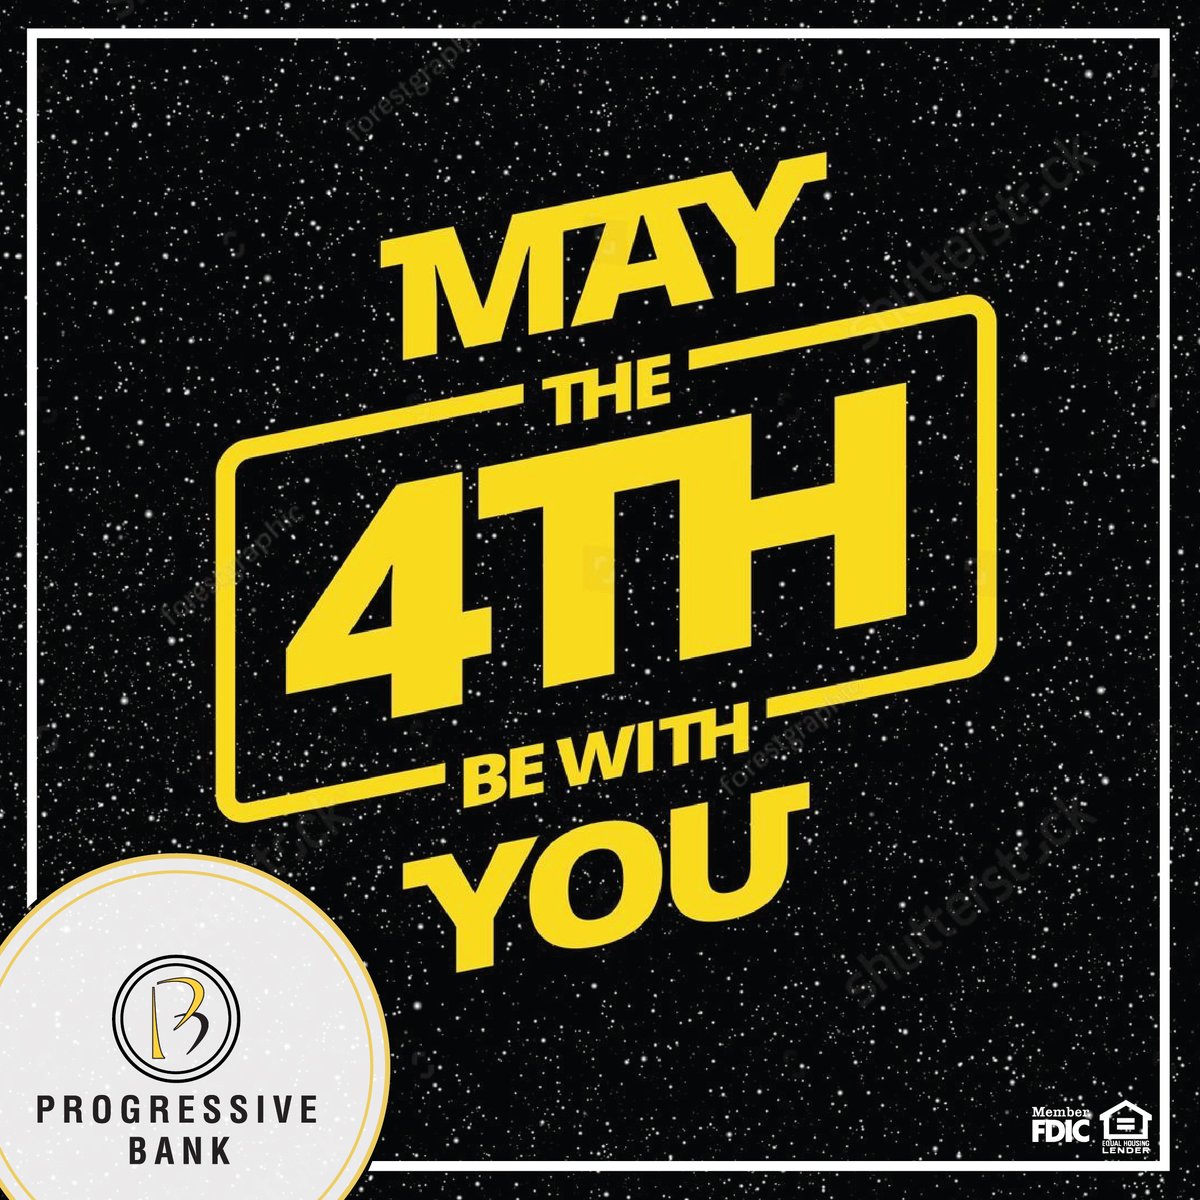 May the 4th be with you all. Happy Star Wars Day!

#ProgressiveBank #LocalBank